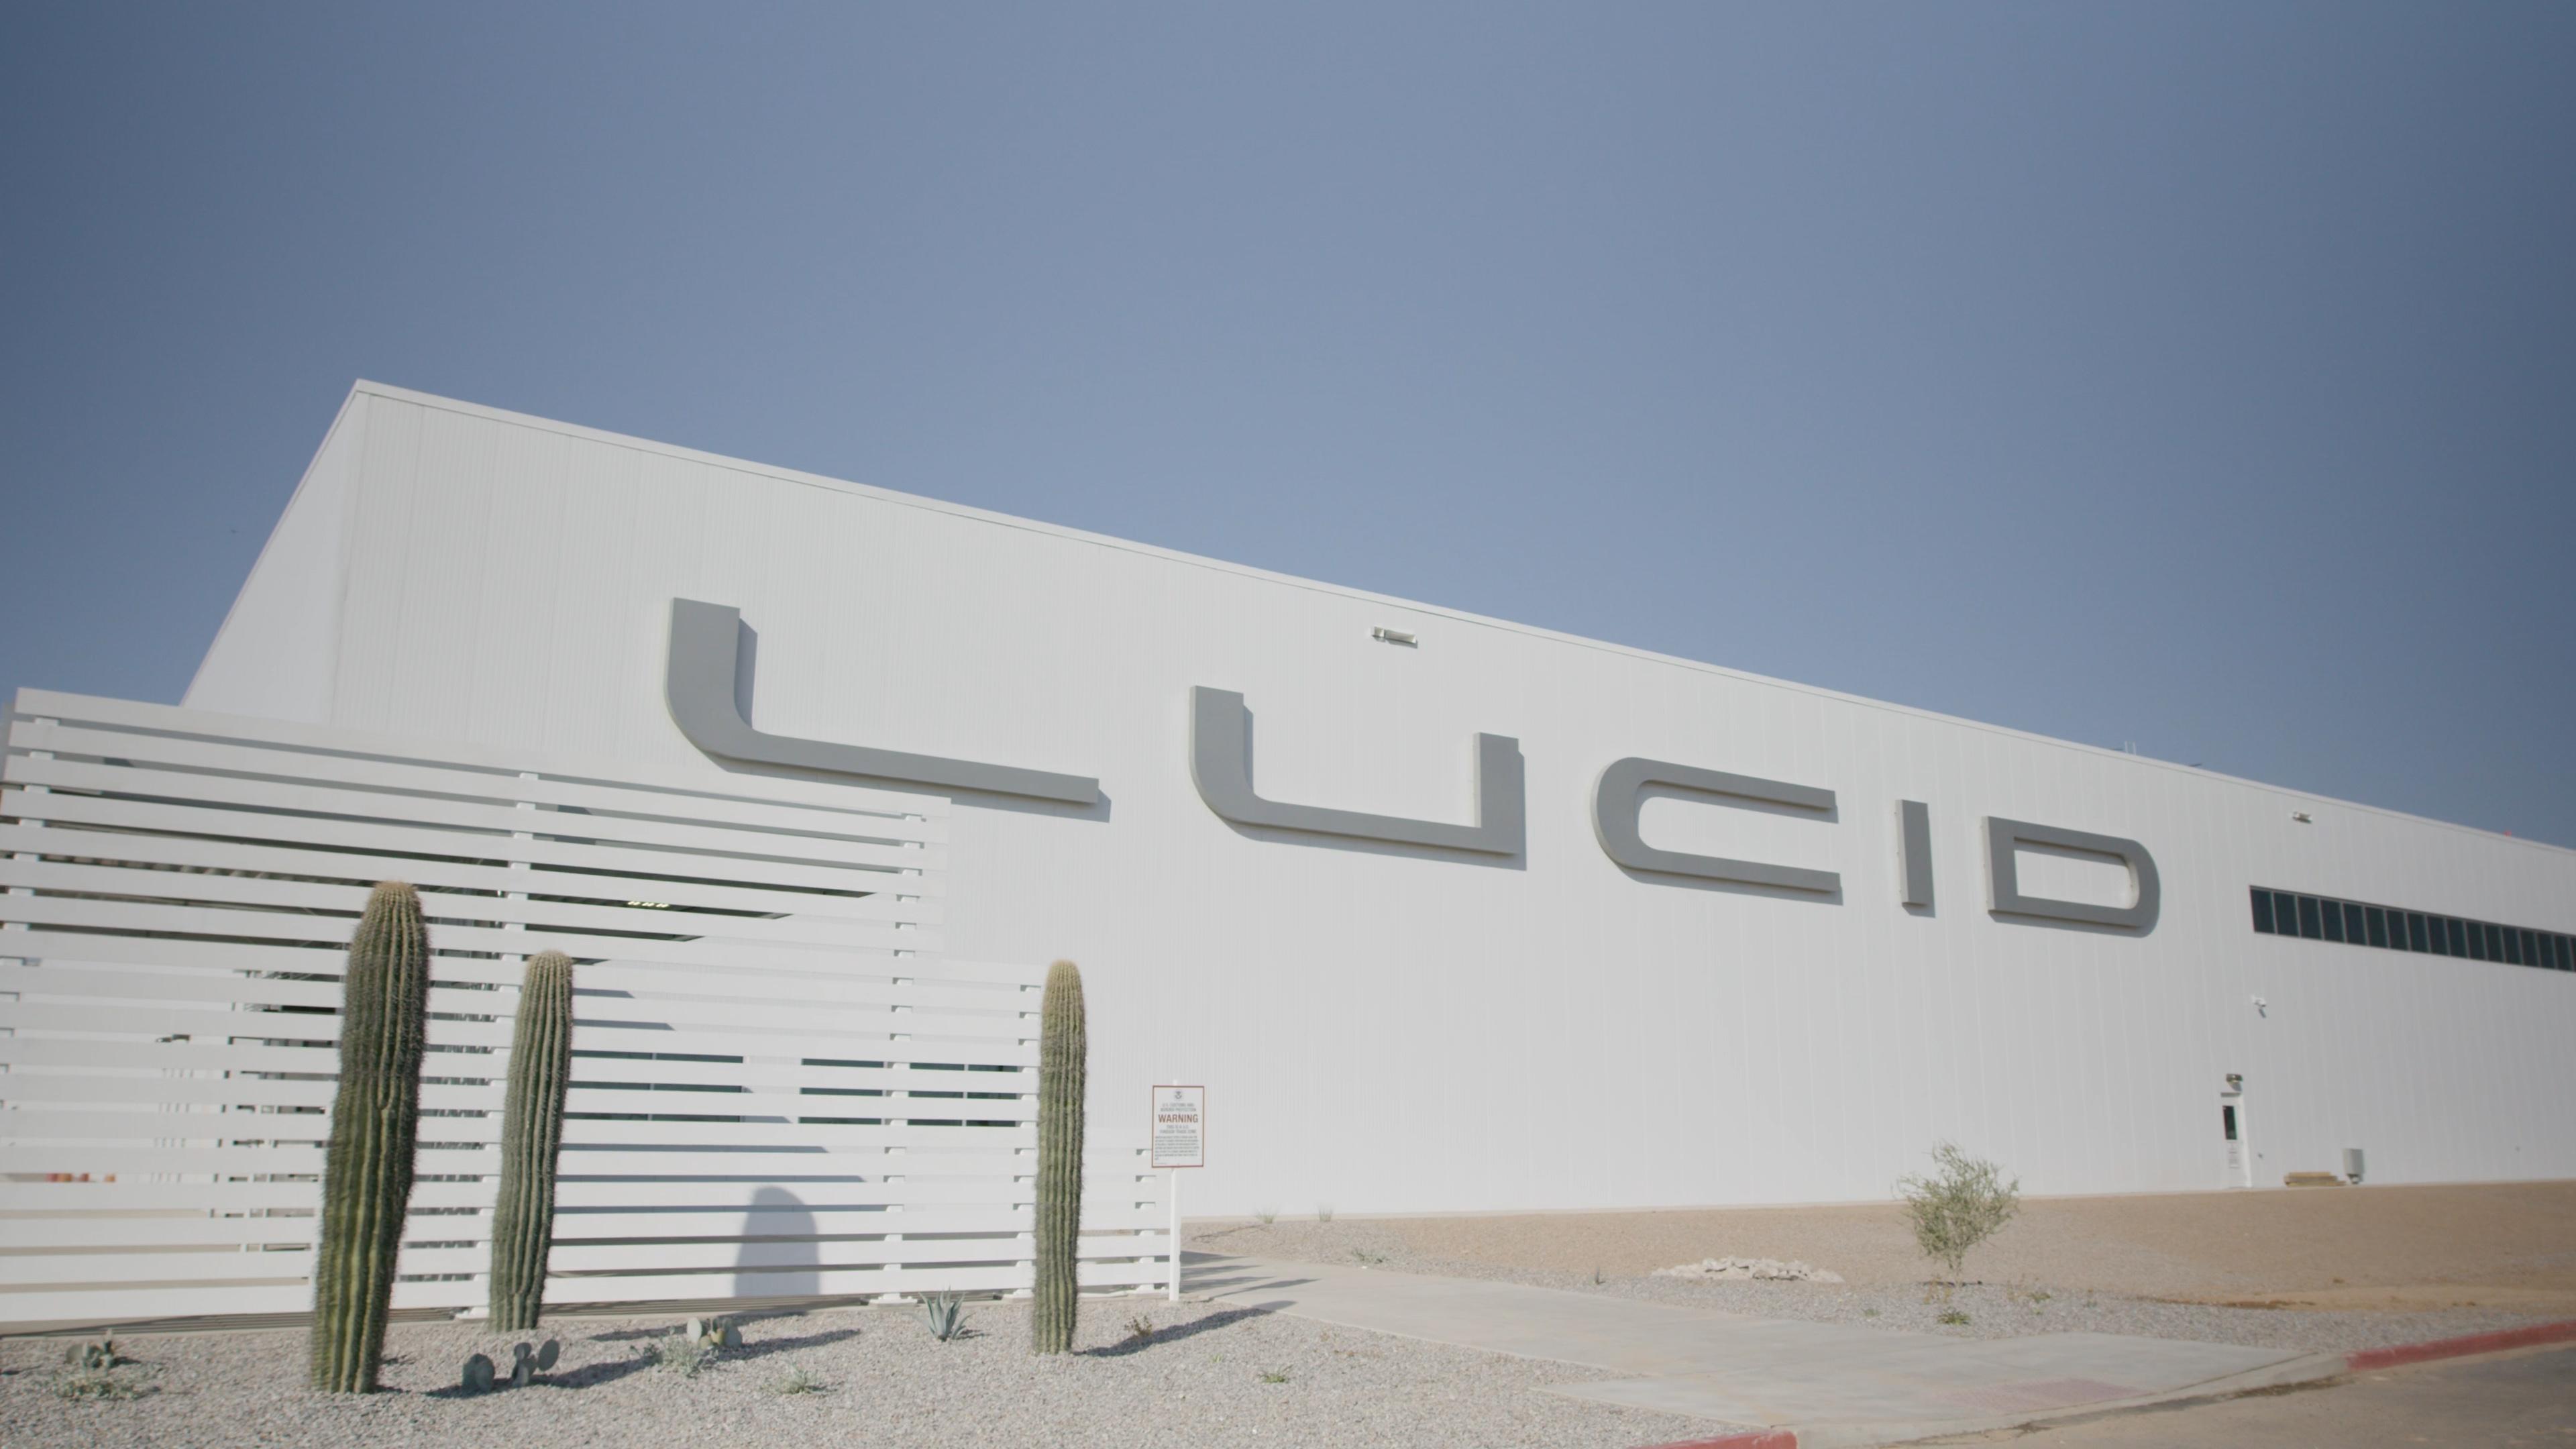 Lucid’s new factory could be a huge economic boost for Casa Granda, Arizona.